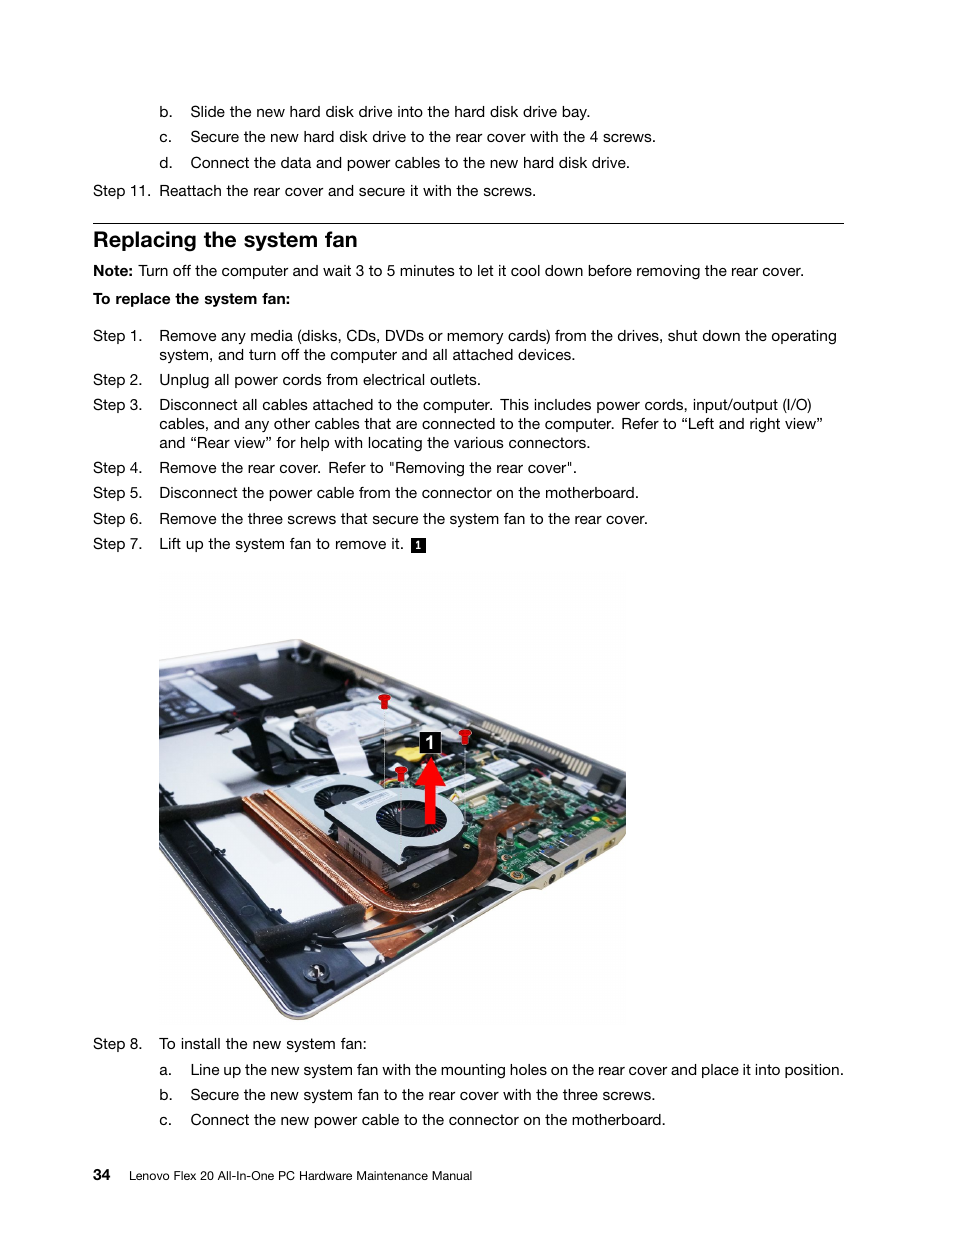 Replacing the system fan | Lenovo Flex 20 All-in-One IdeaCentre User Manual  | Page 40 / 61